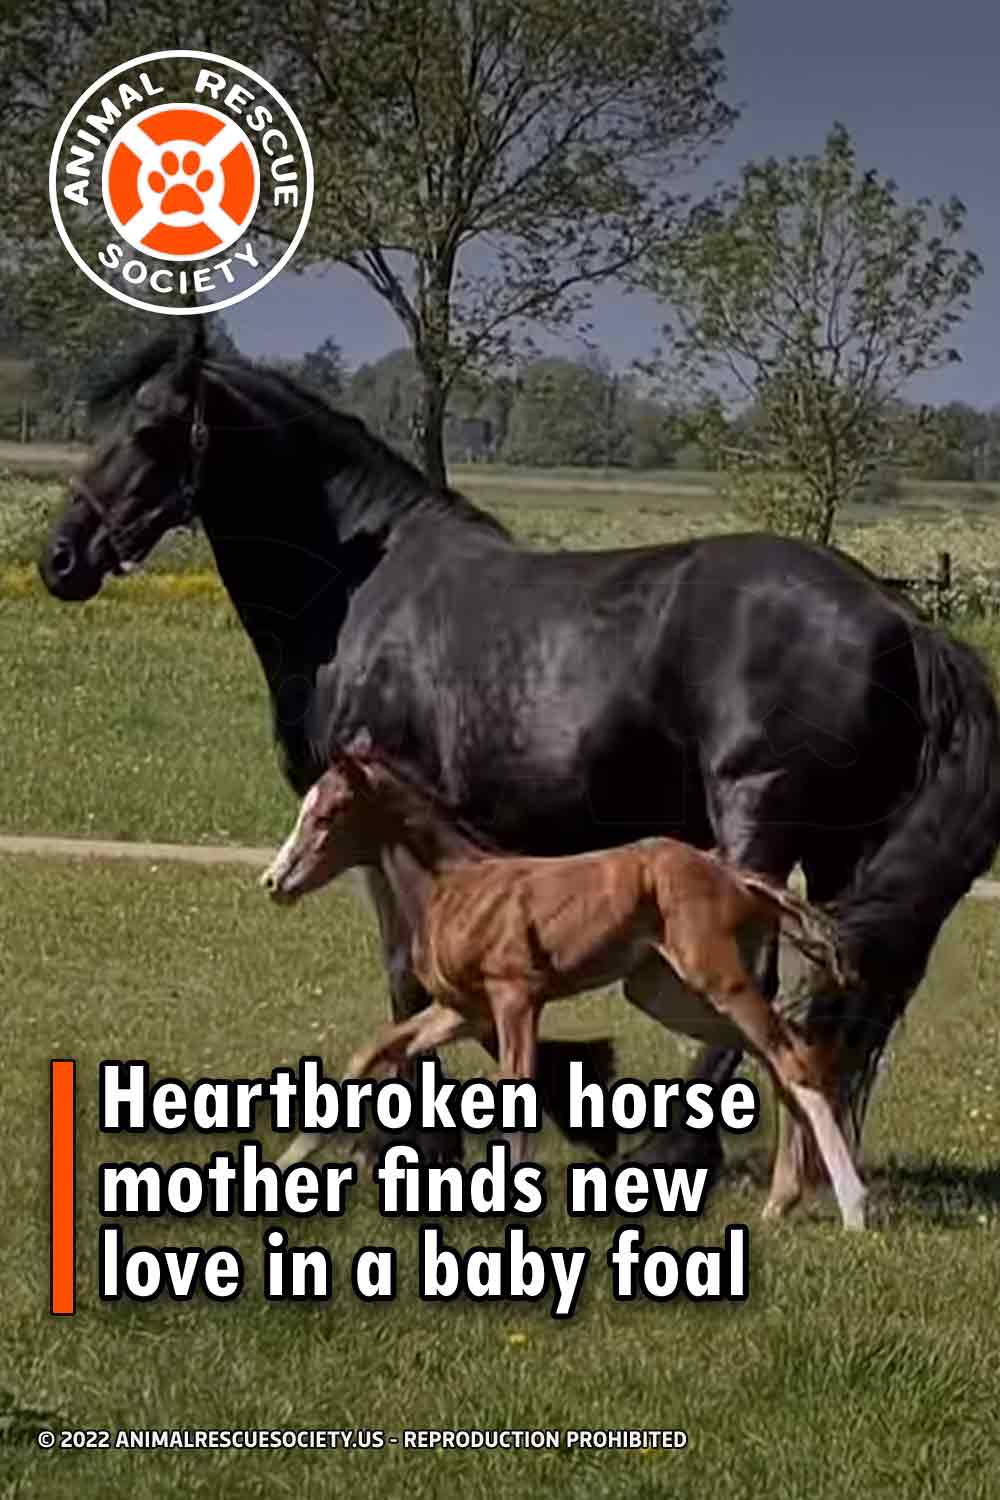 Heartbroken horse mother finds new love in a baby foal